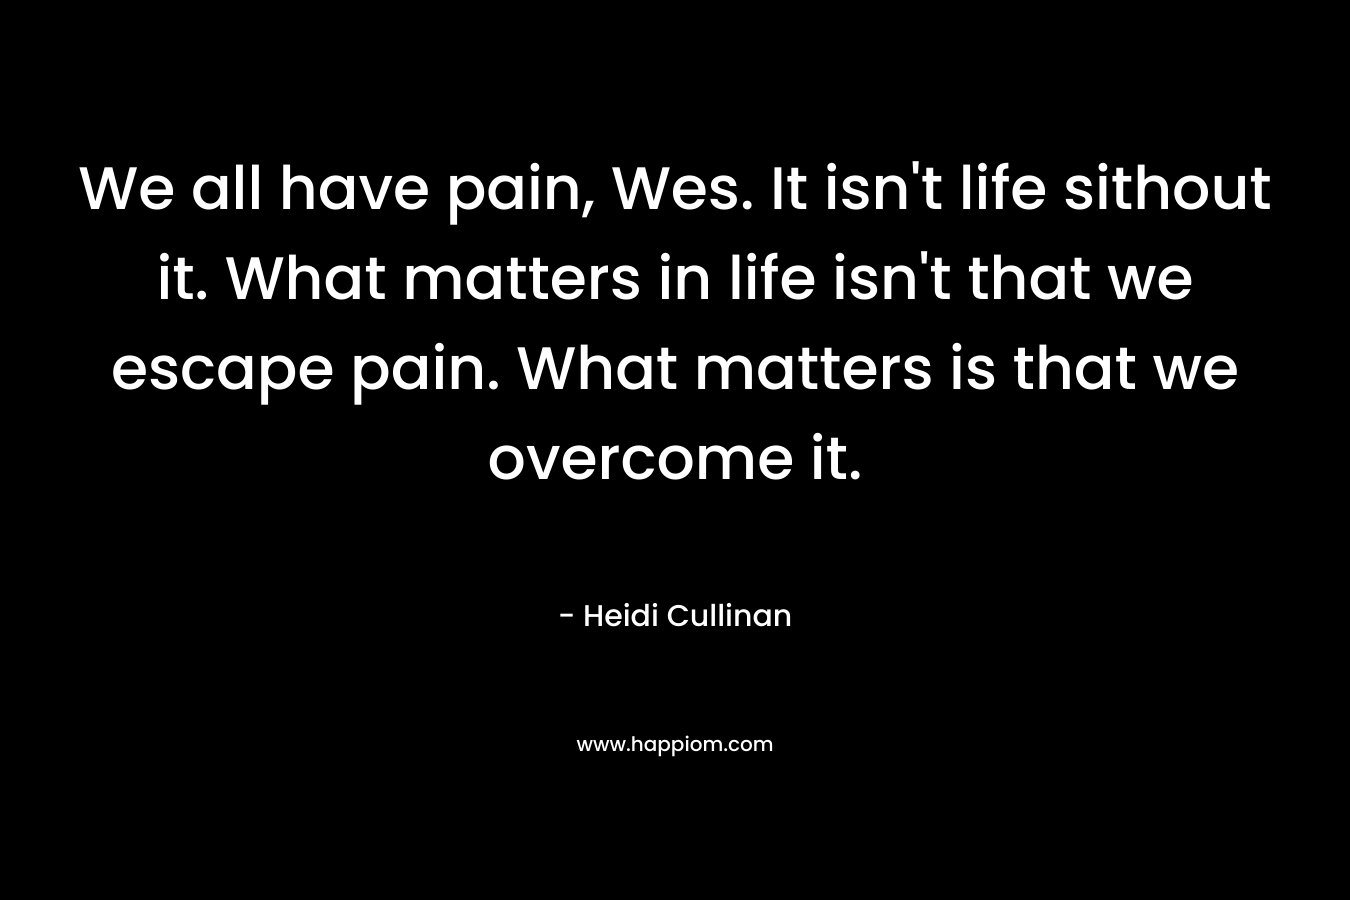 We all have pain, Wes. It isn't life sithout it. What matters in life isn't that we escape pain. What matters is that we overcome it.